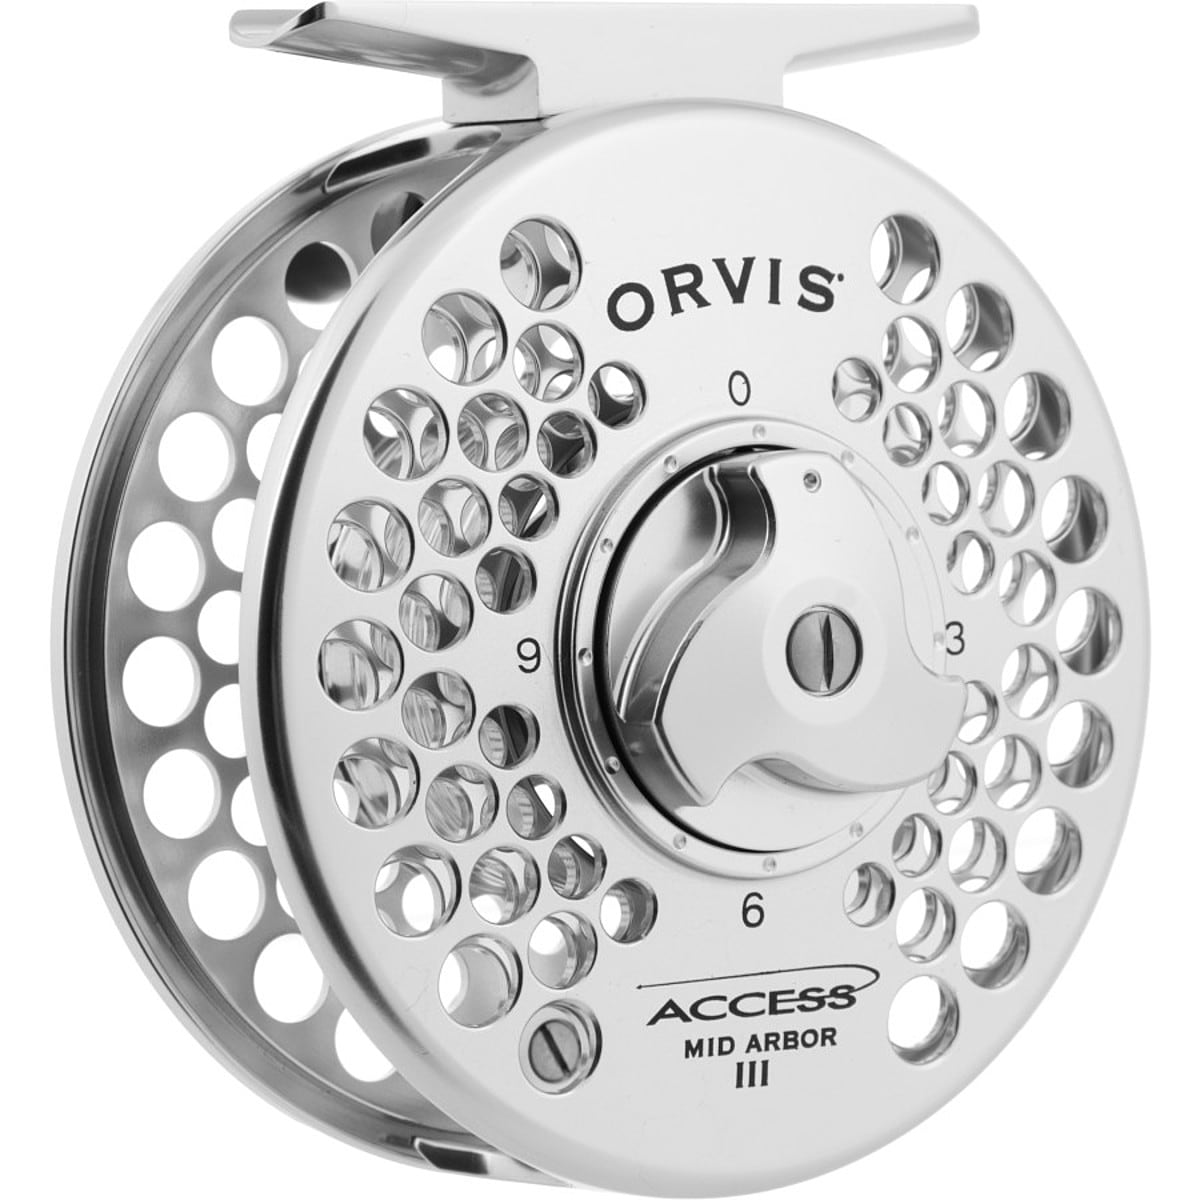 Orvis Access Mid Arbor Fly Reel - Fishing